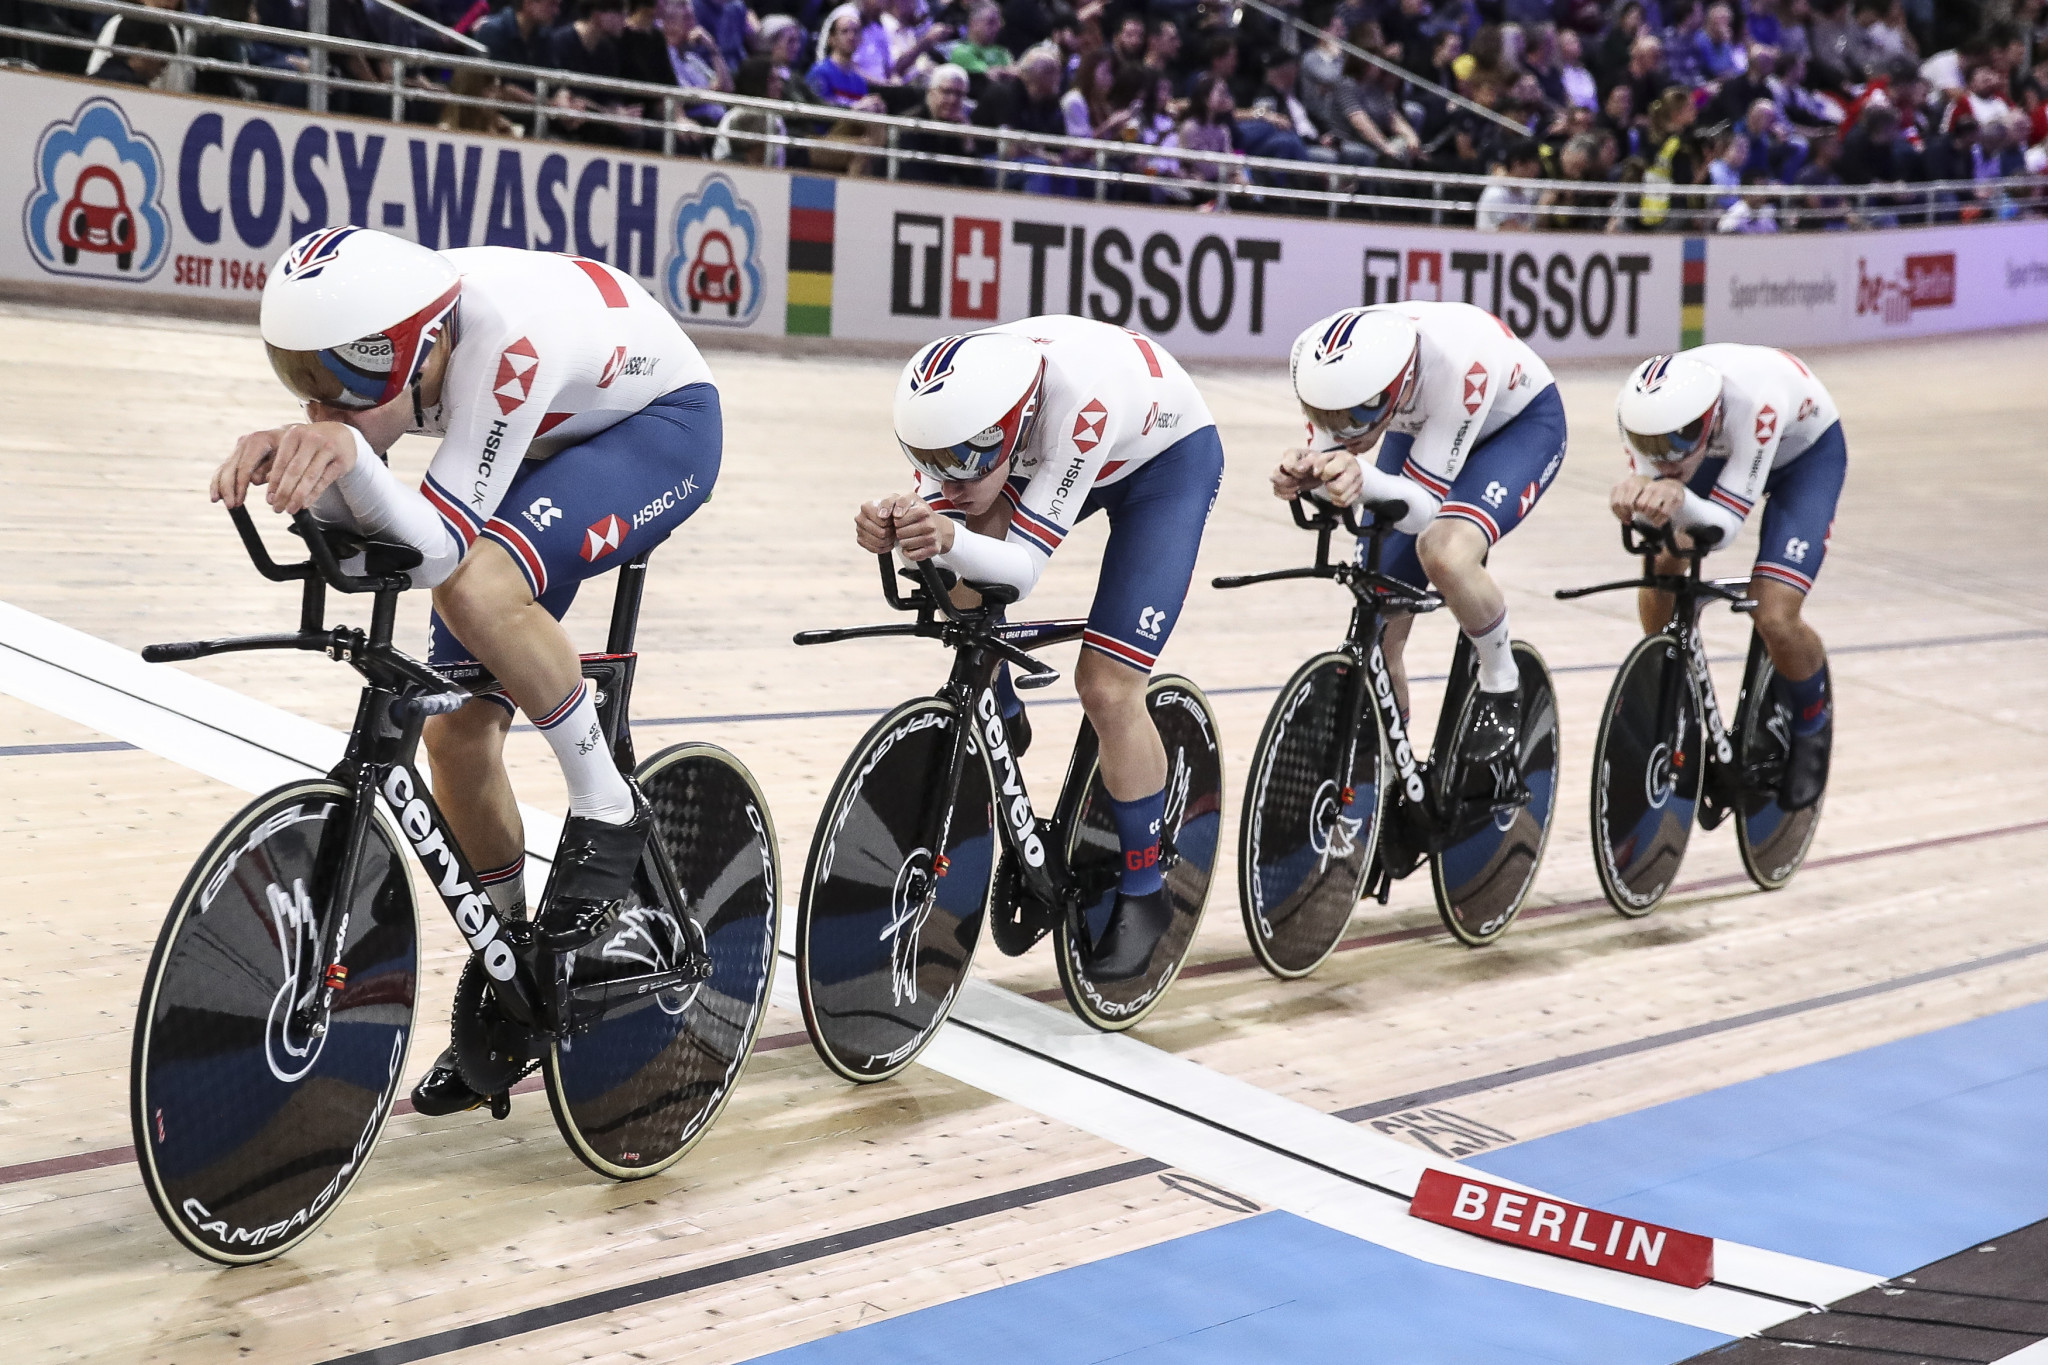 Stephen Park, performance director for the British cycling team, insists there are plans in place to ensure riders do not lose momentum ahead of Tokyo 2020 ©Getty Images